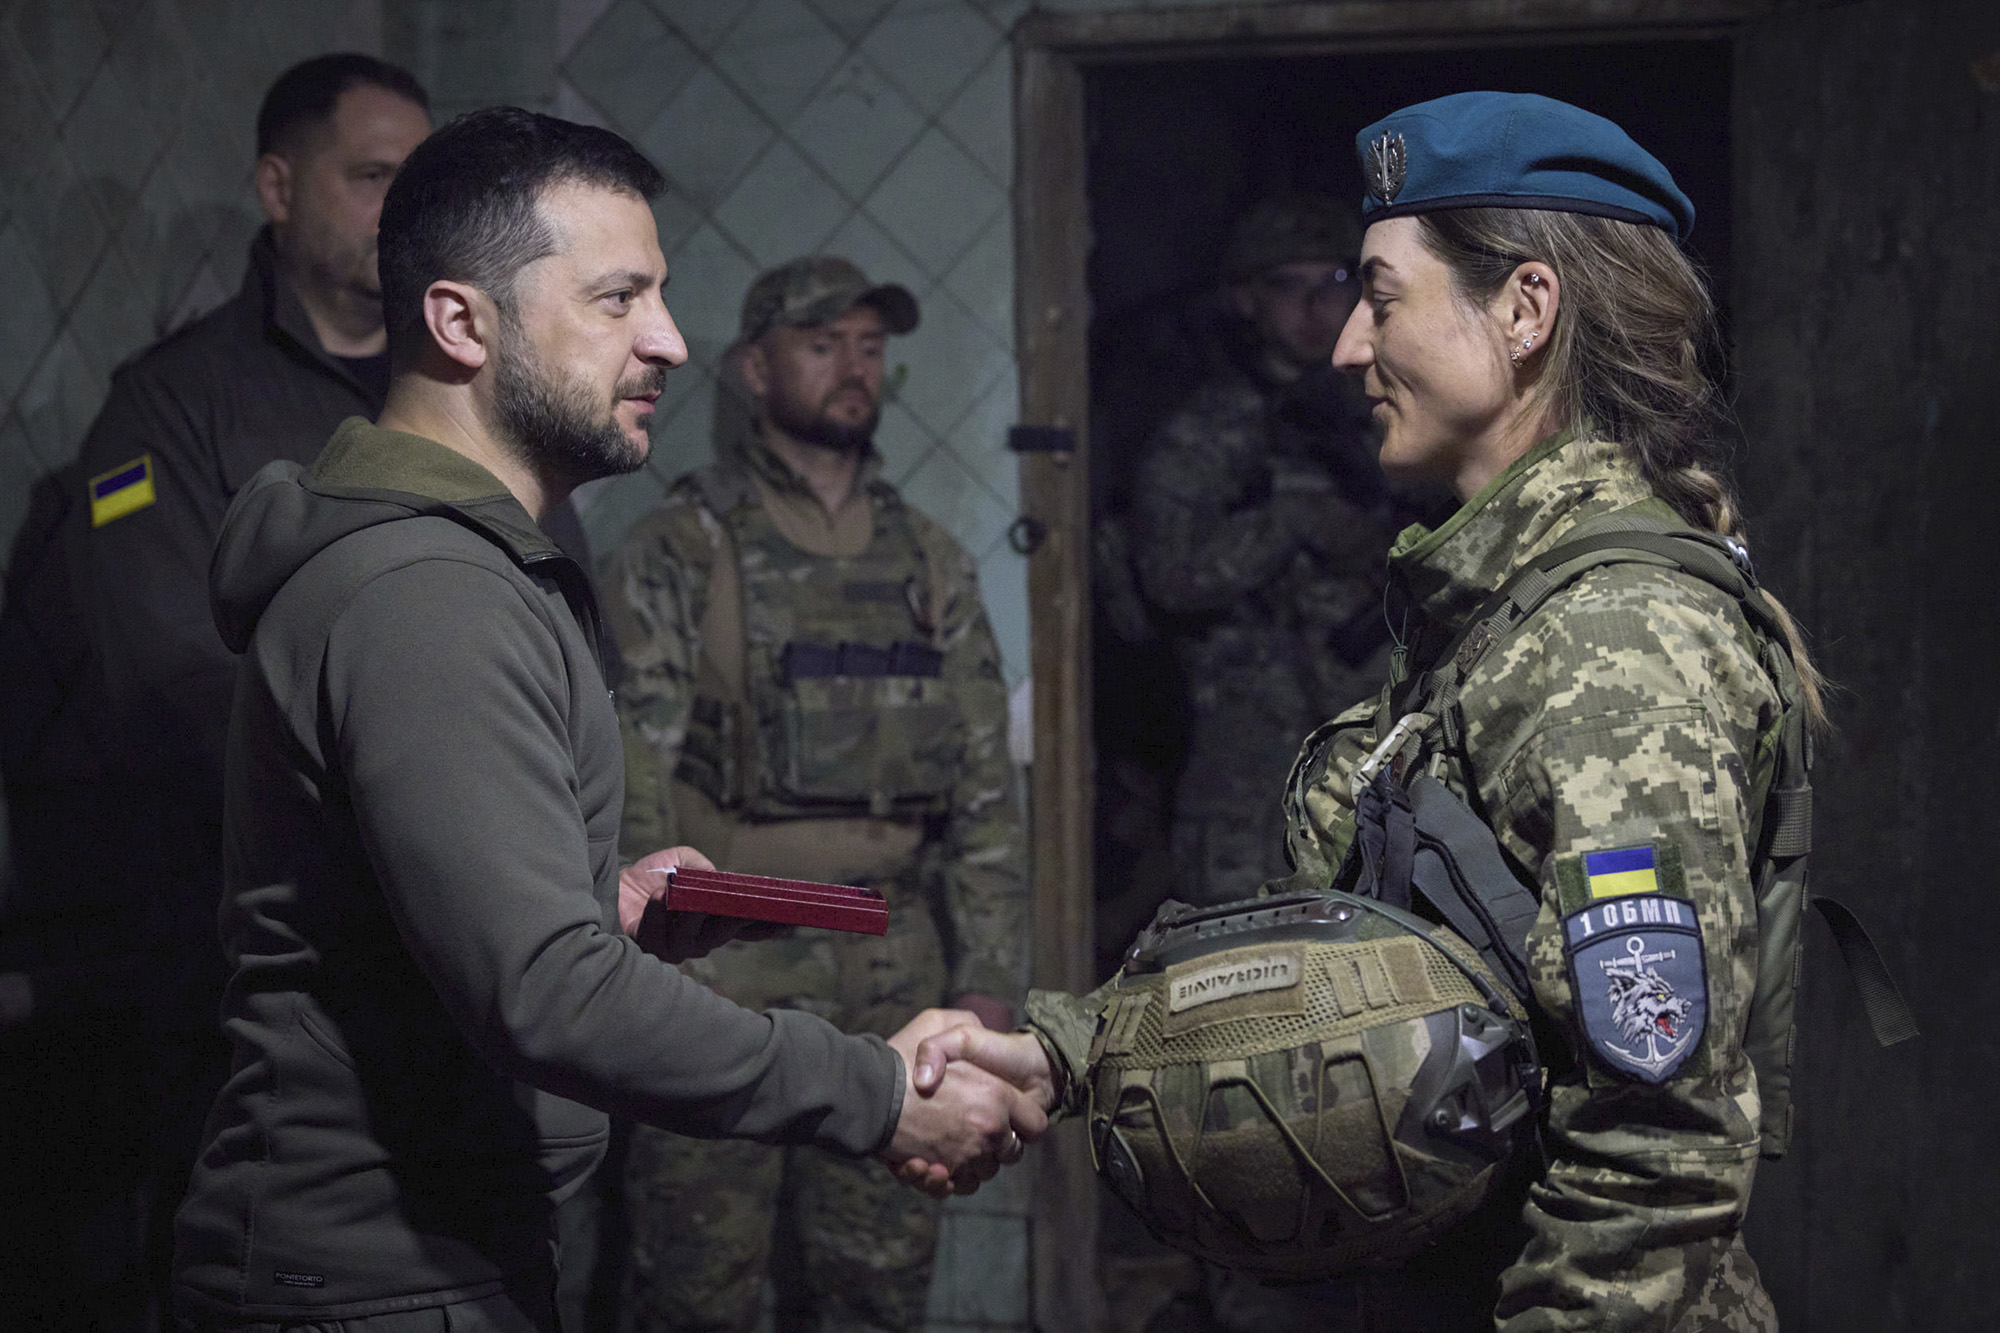 Ukrainian president Volodymyr Zelenskyy shakes hands with a service woman during an awarding ceremony as he visits the Donetsk region, Ukraine, on May 23.